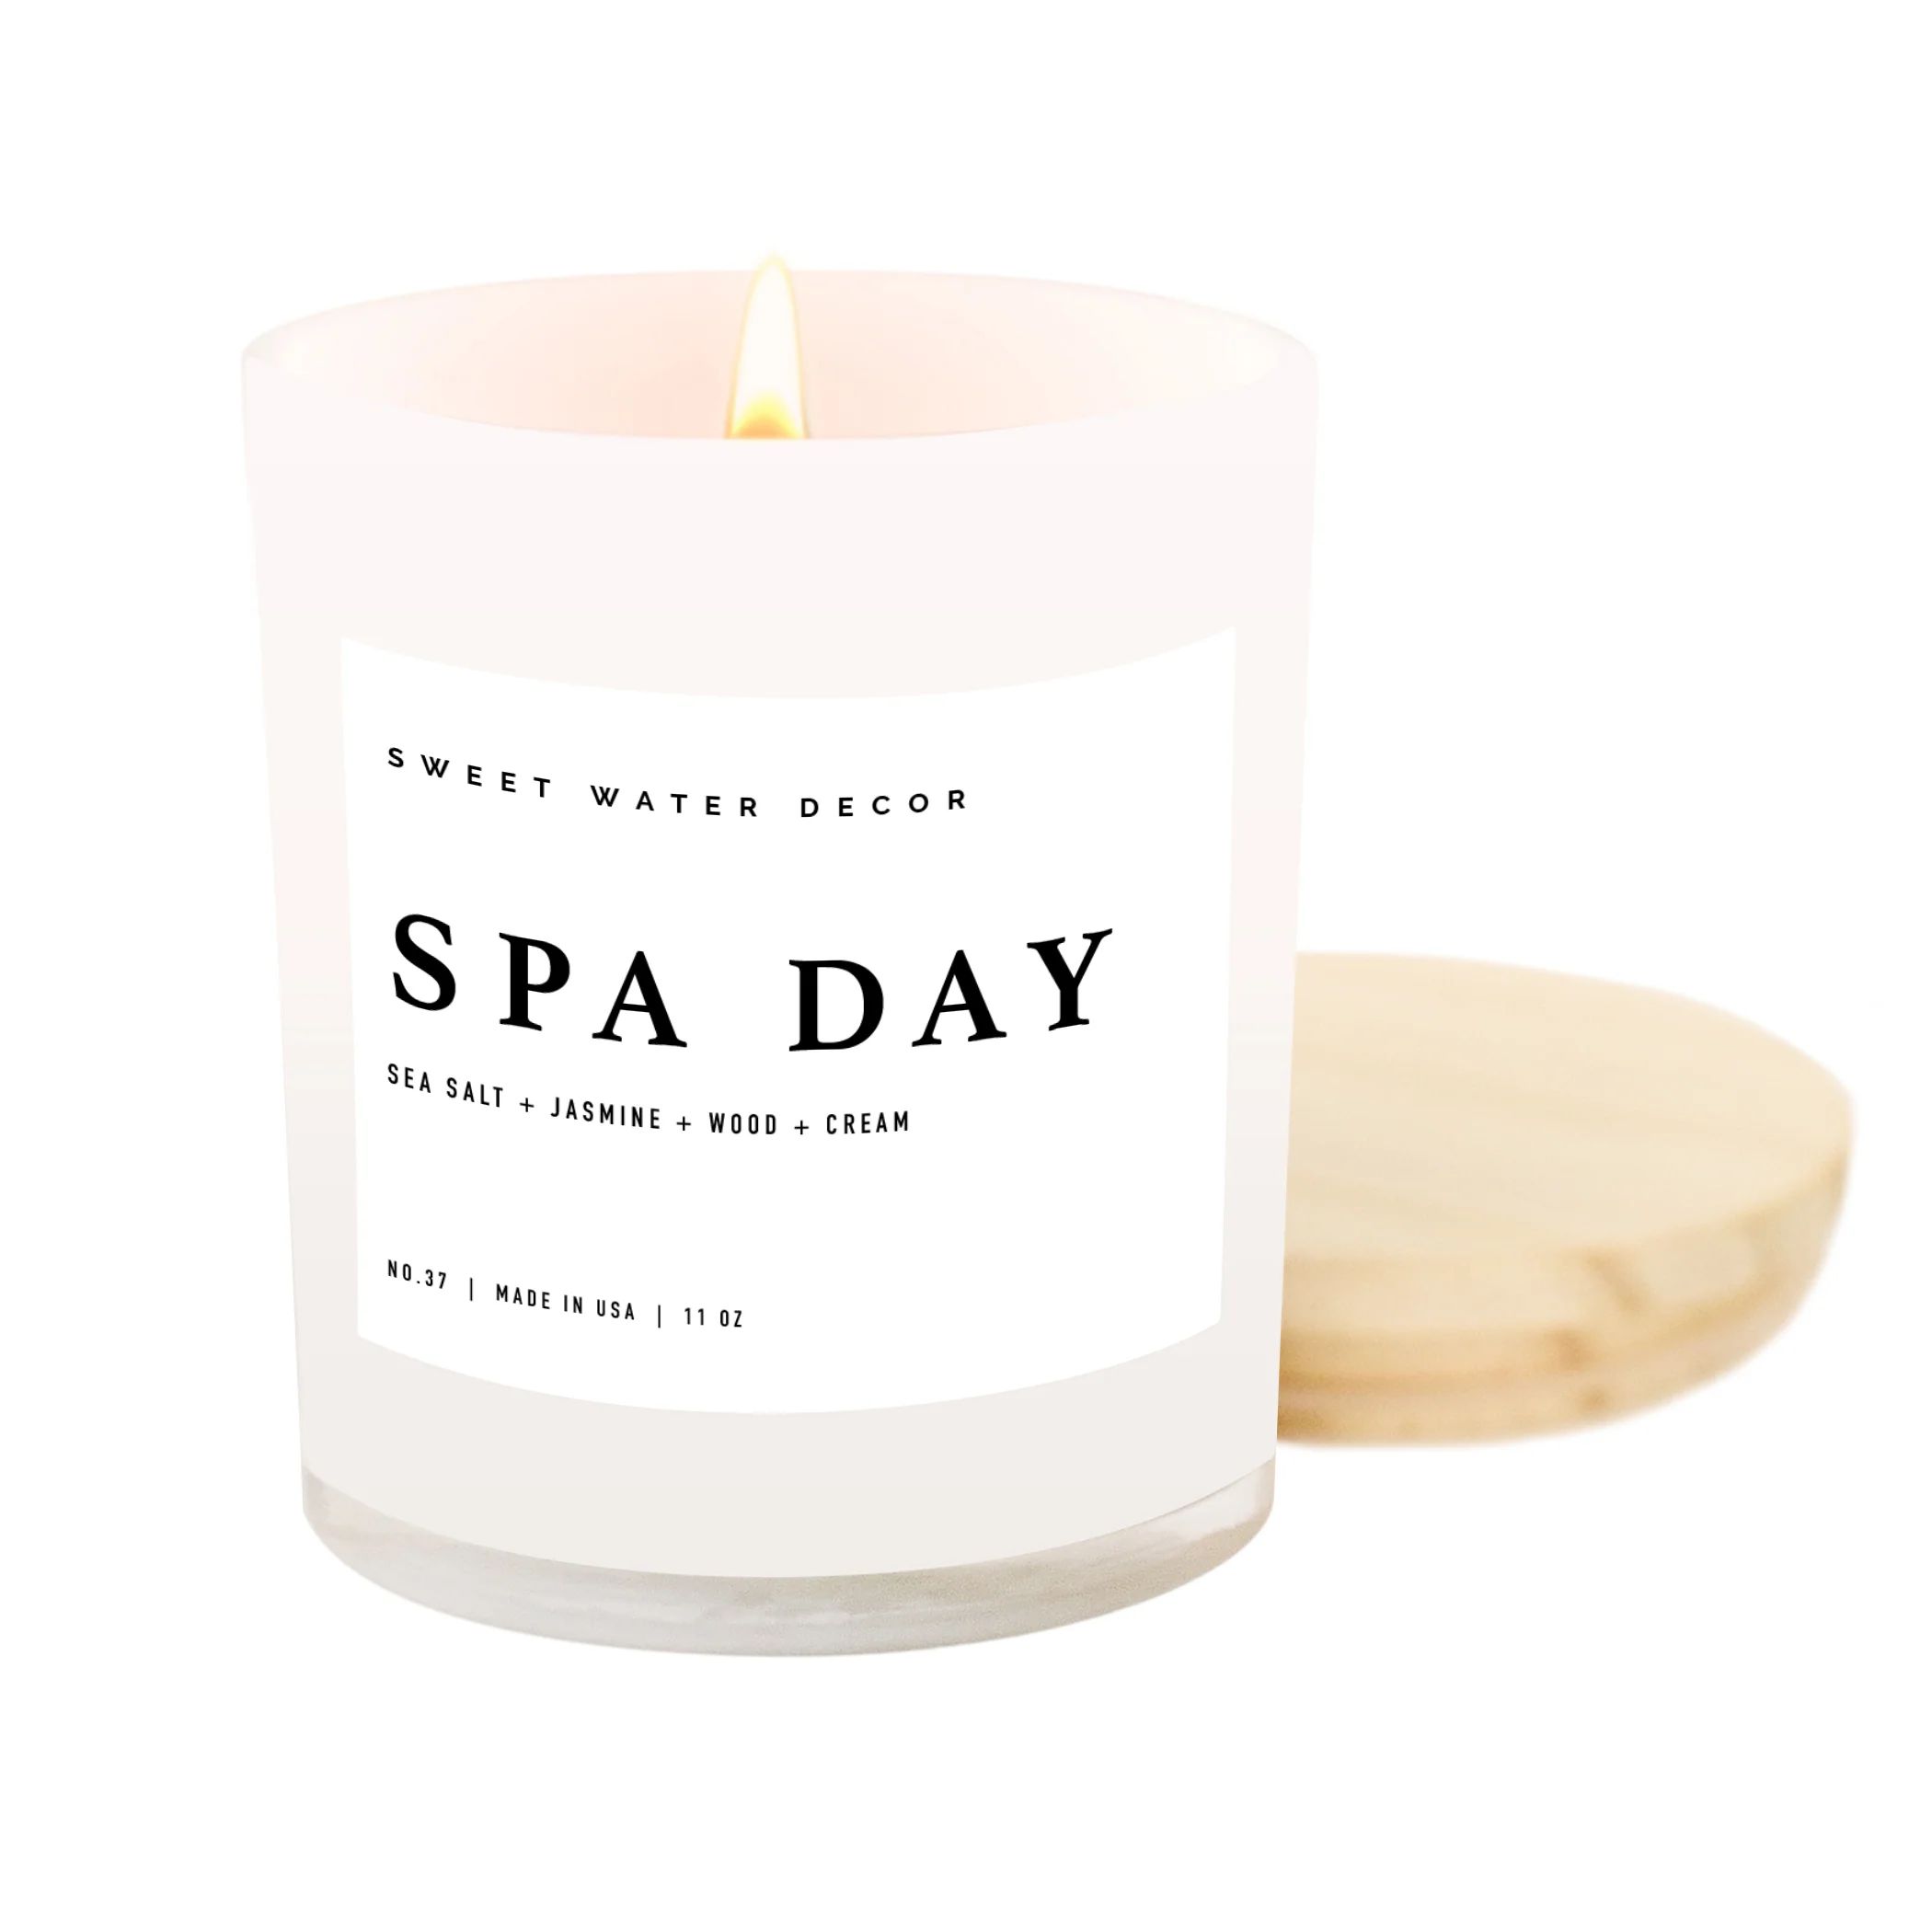 Spa Day Soy Candle | White Jar Candle + Wood Lid | Sweet Water Decor, LLC